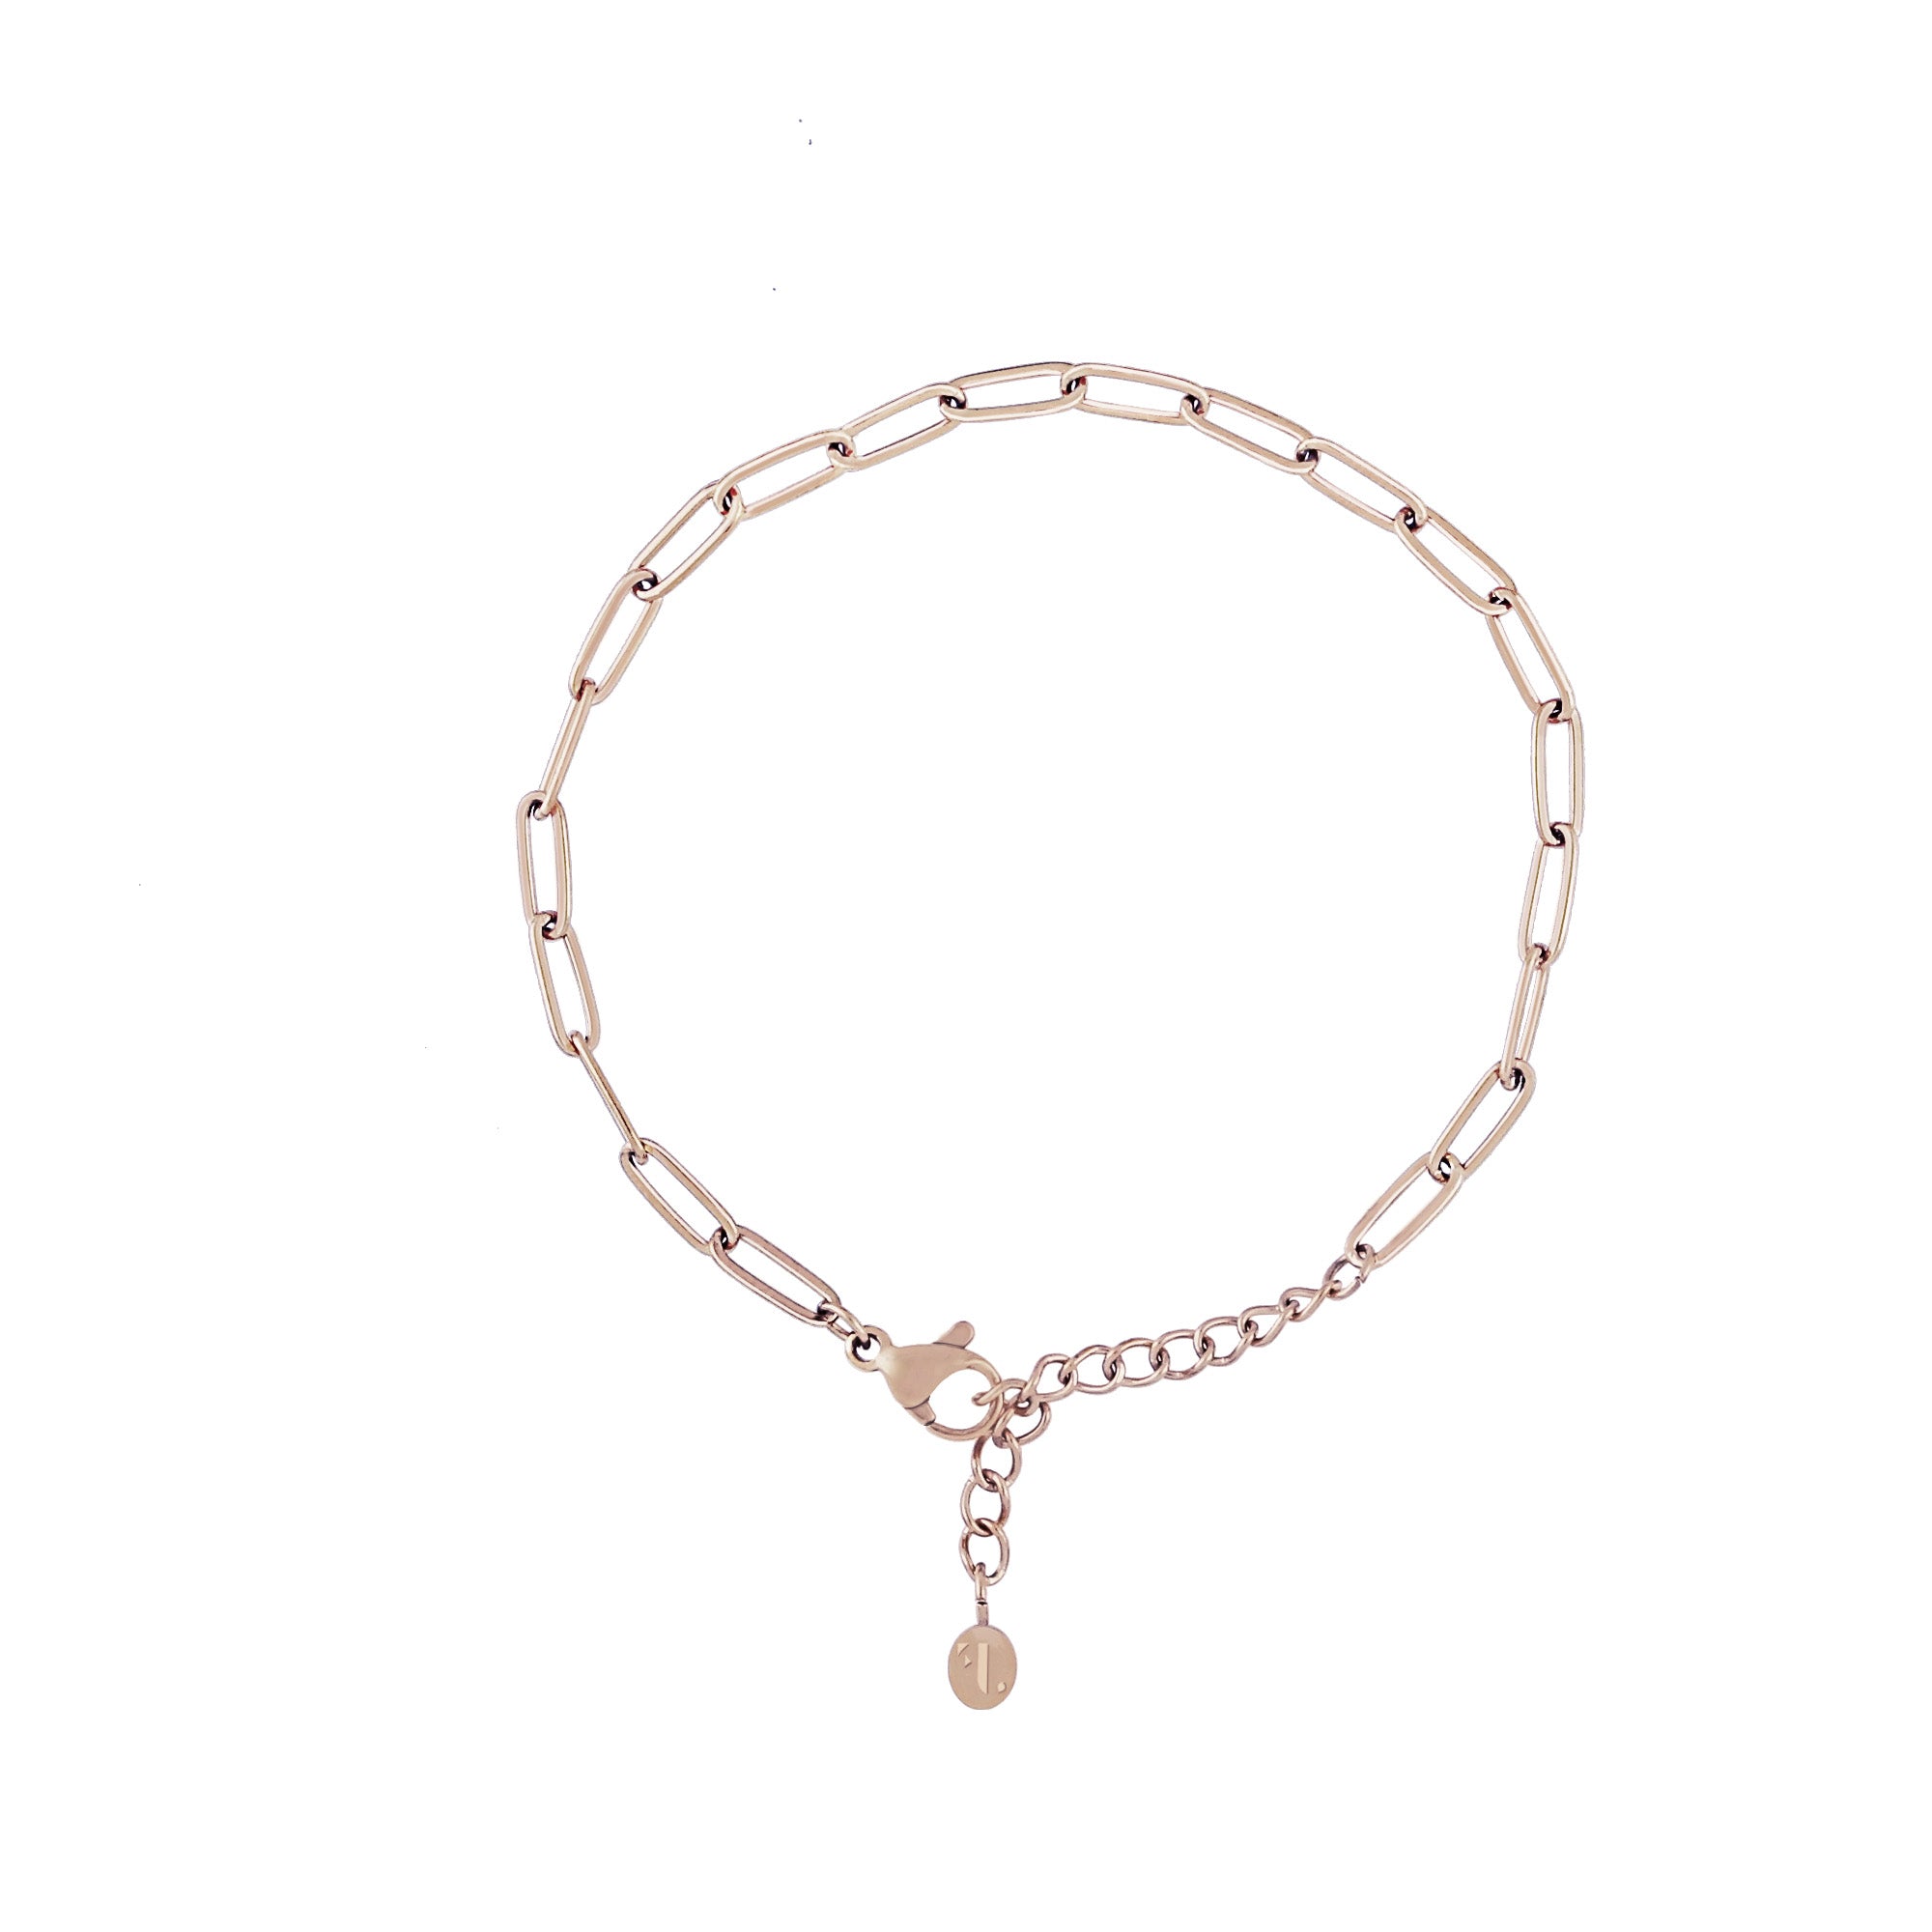 Maritsa women's bracelet by Five Jwlry, crafted from a 3mm paperclip chain in rose gold colored, water-resistant 316L stainless steel. Available in size 16cm with a 4cm extension. Hypoallergenic with a 2-year warranty.